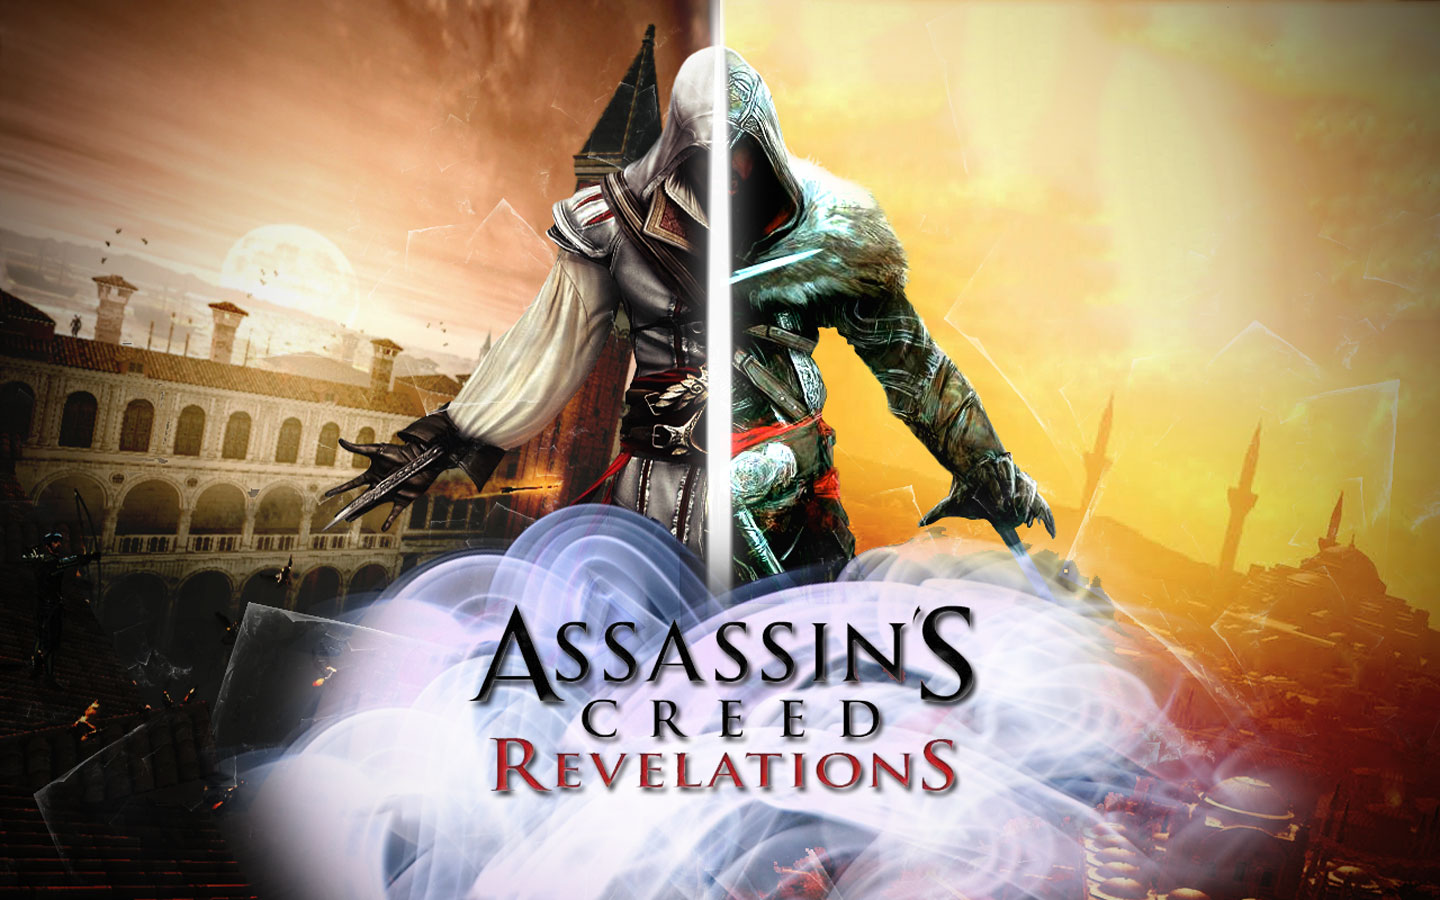 assassin's creed revelations wallpaper,action adventure game,movie,cg artwork,games,poster